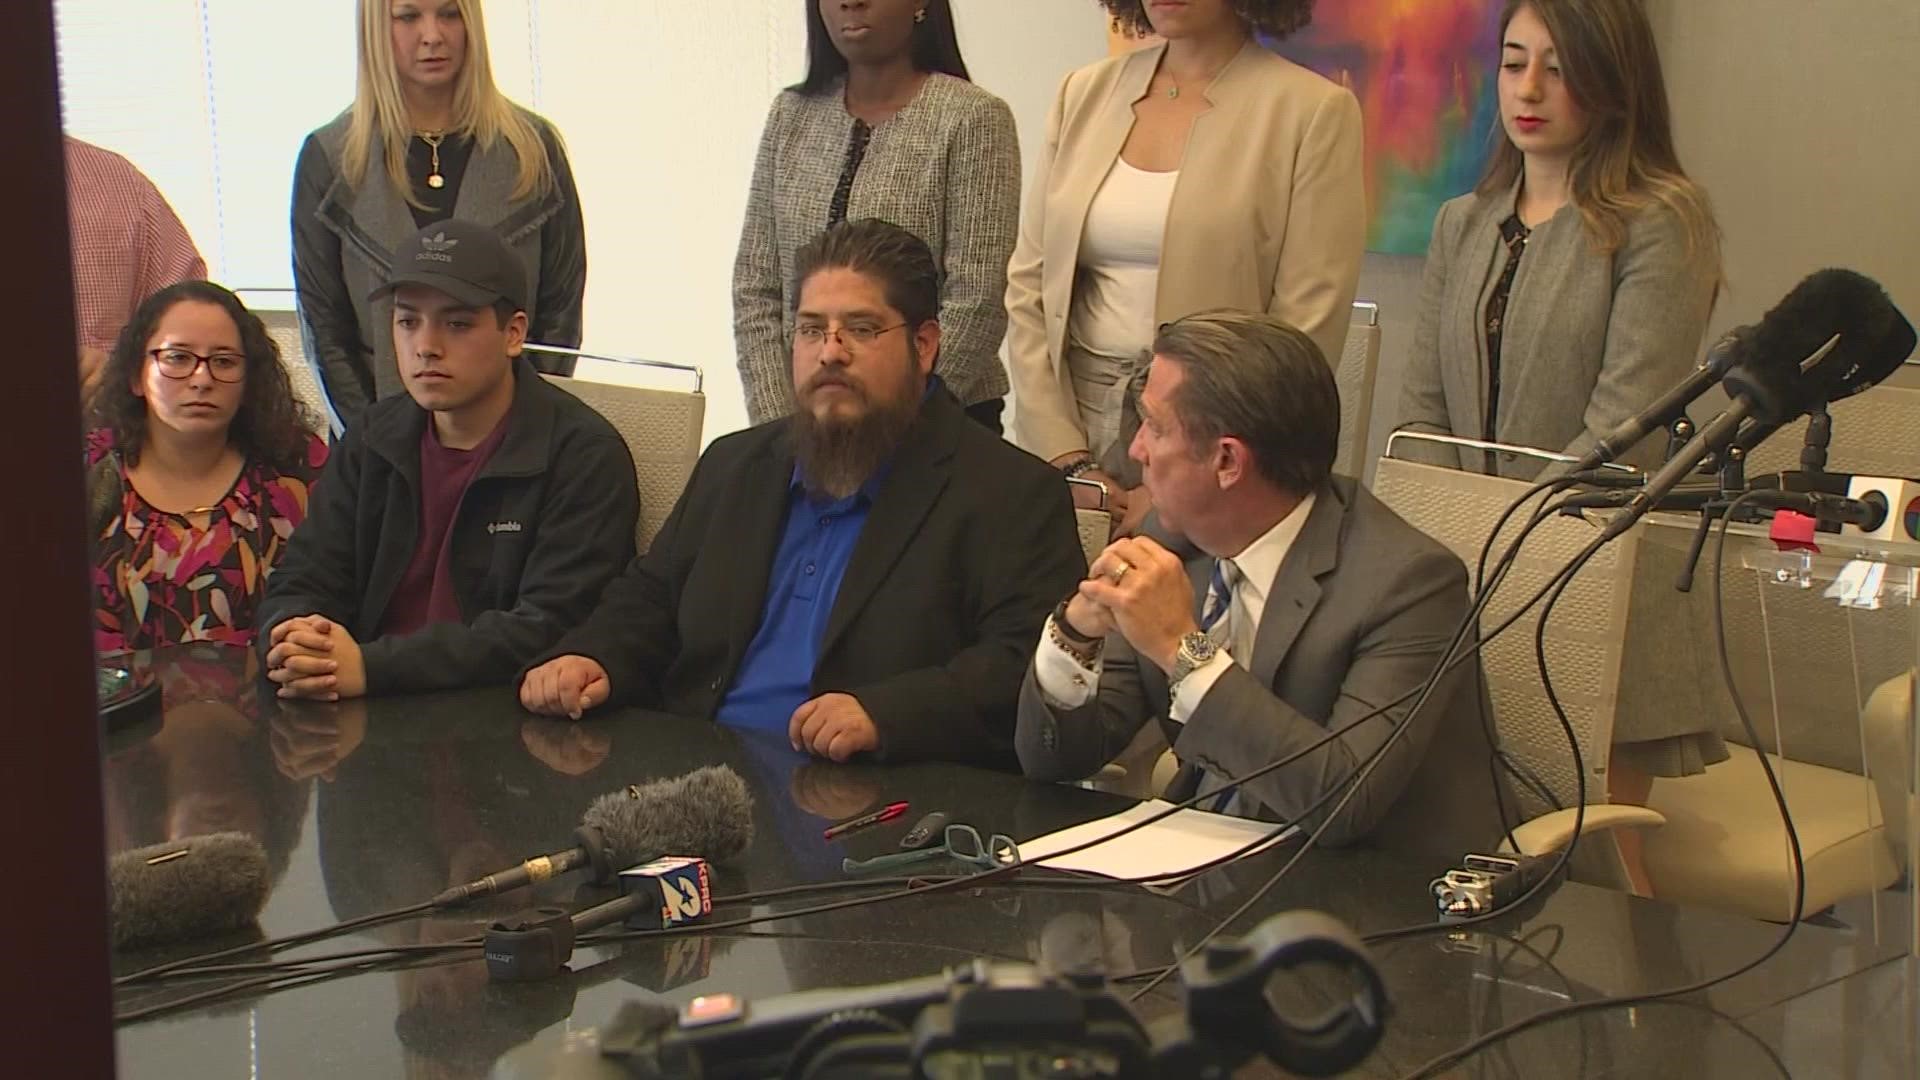 Buzbee held a news conference on Monday to discuss the lawsuit he plans to file.